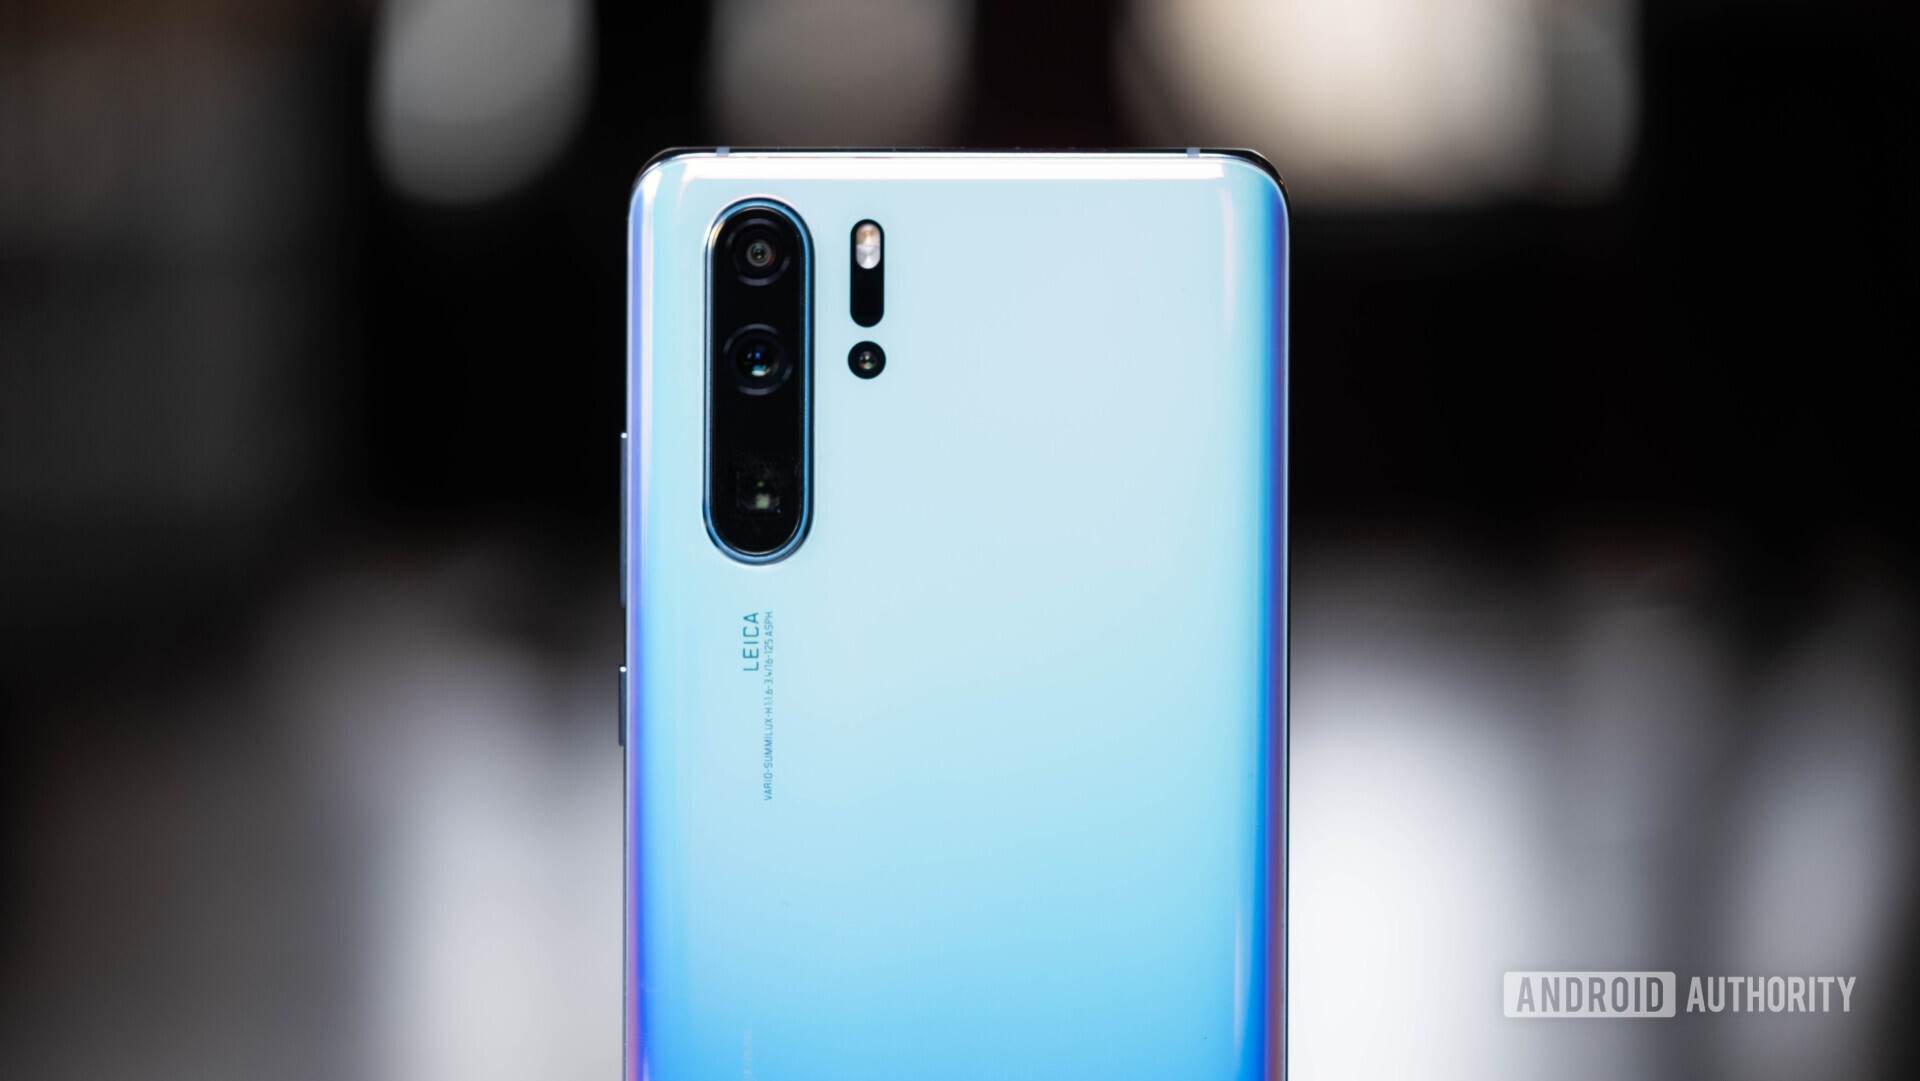 Backside of a White Huawei P30 Pro showing the rear cameras.